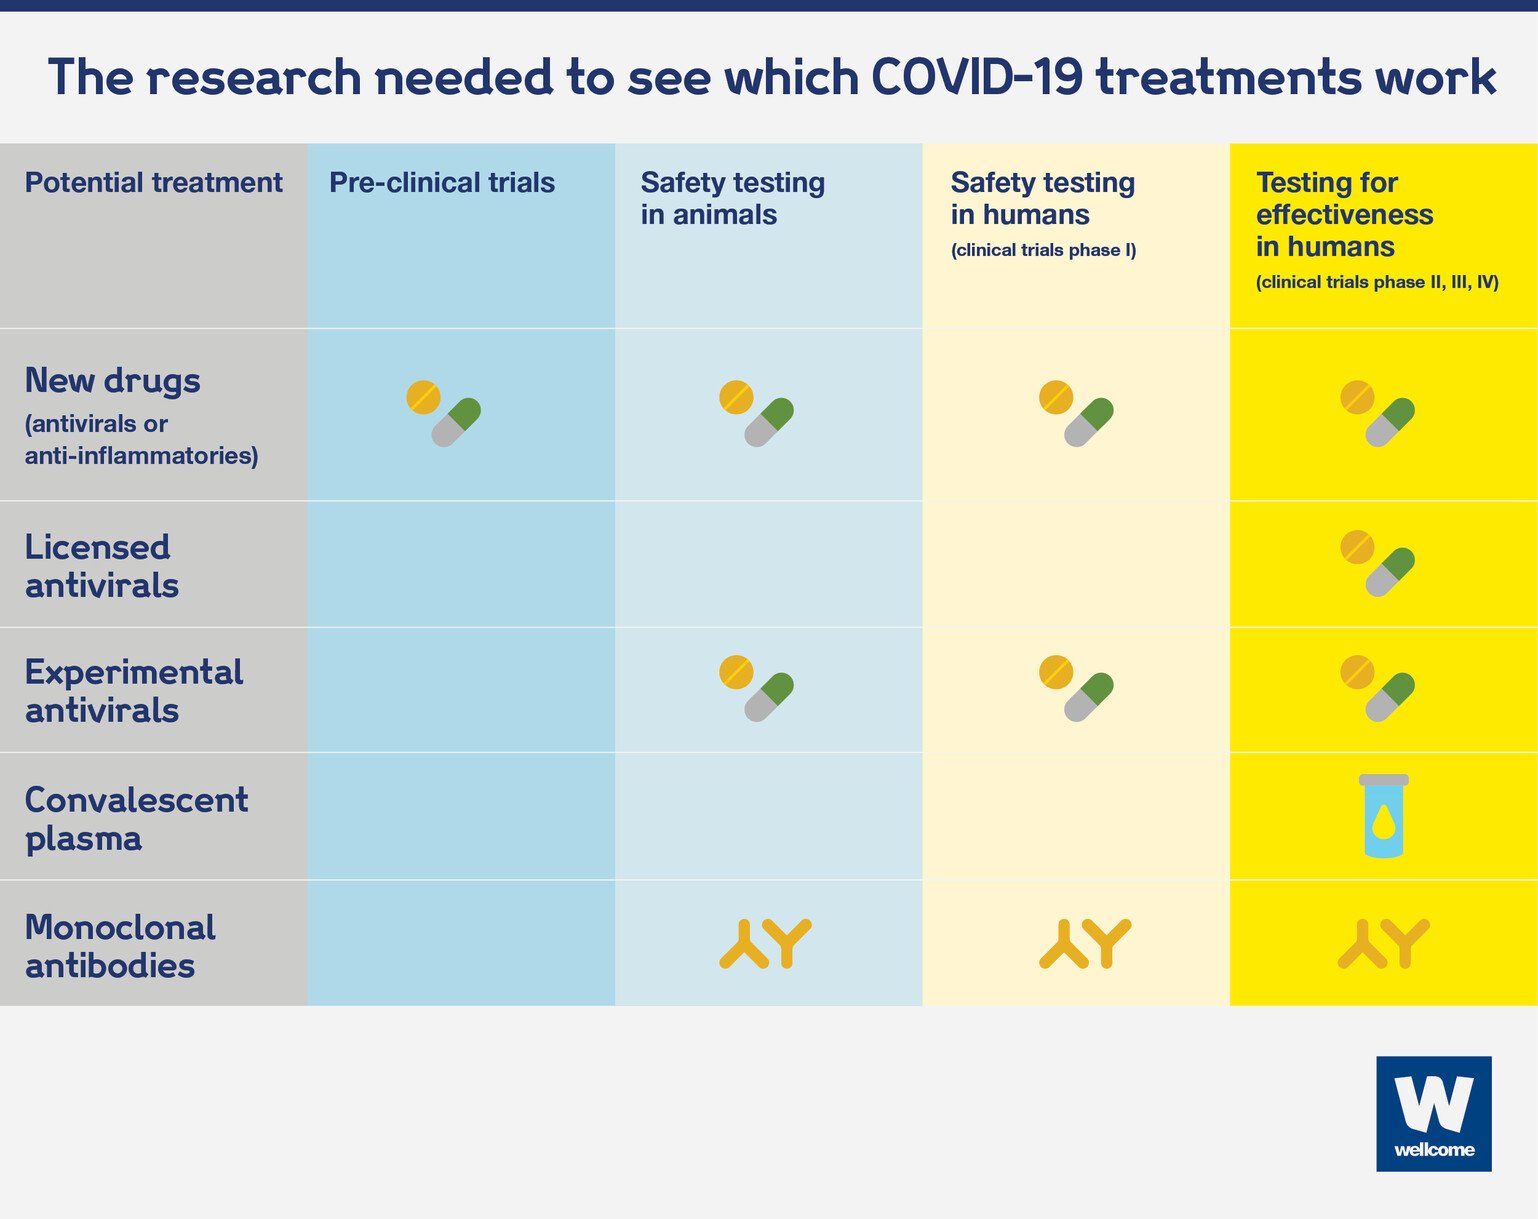 What treatments are being used by hospitals to treat COVID?